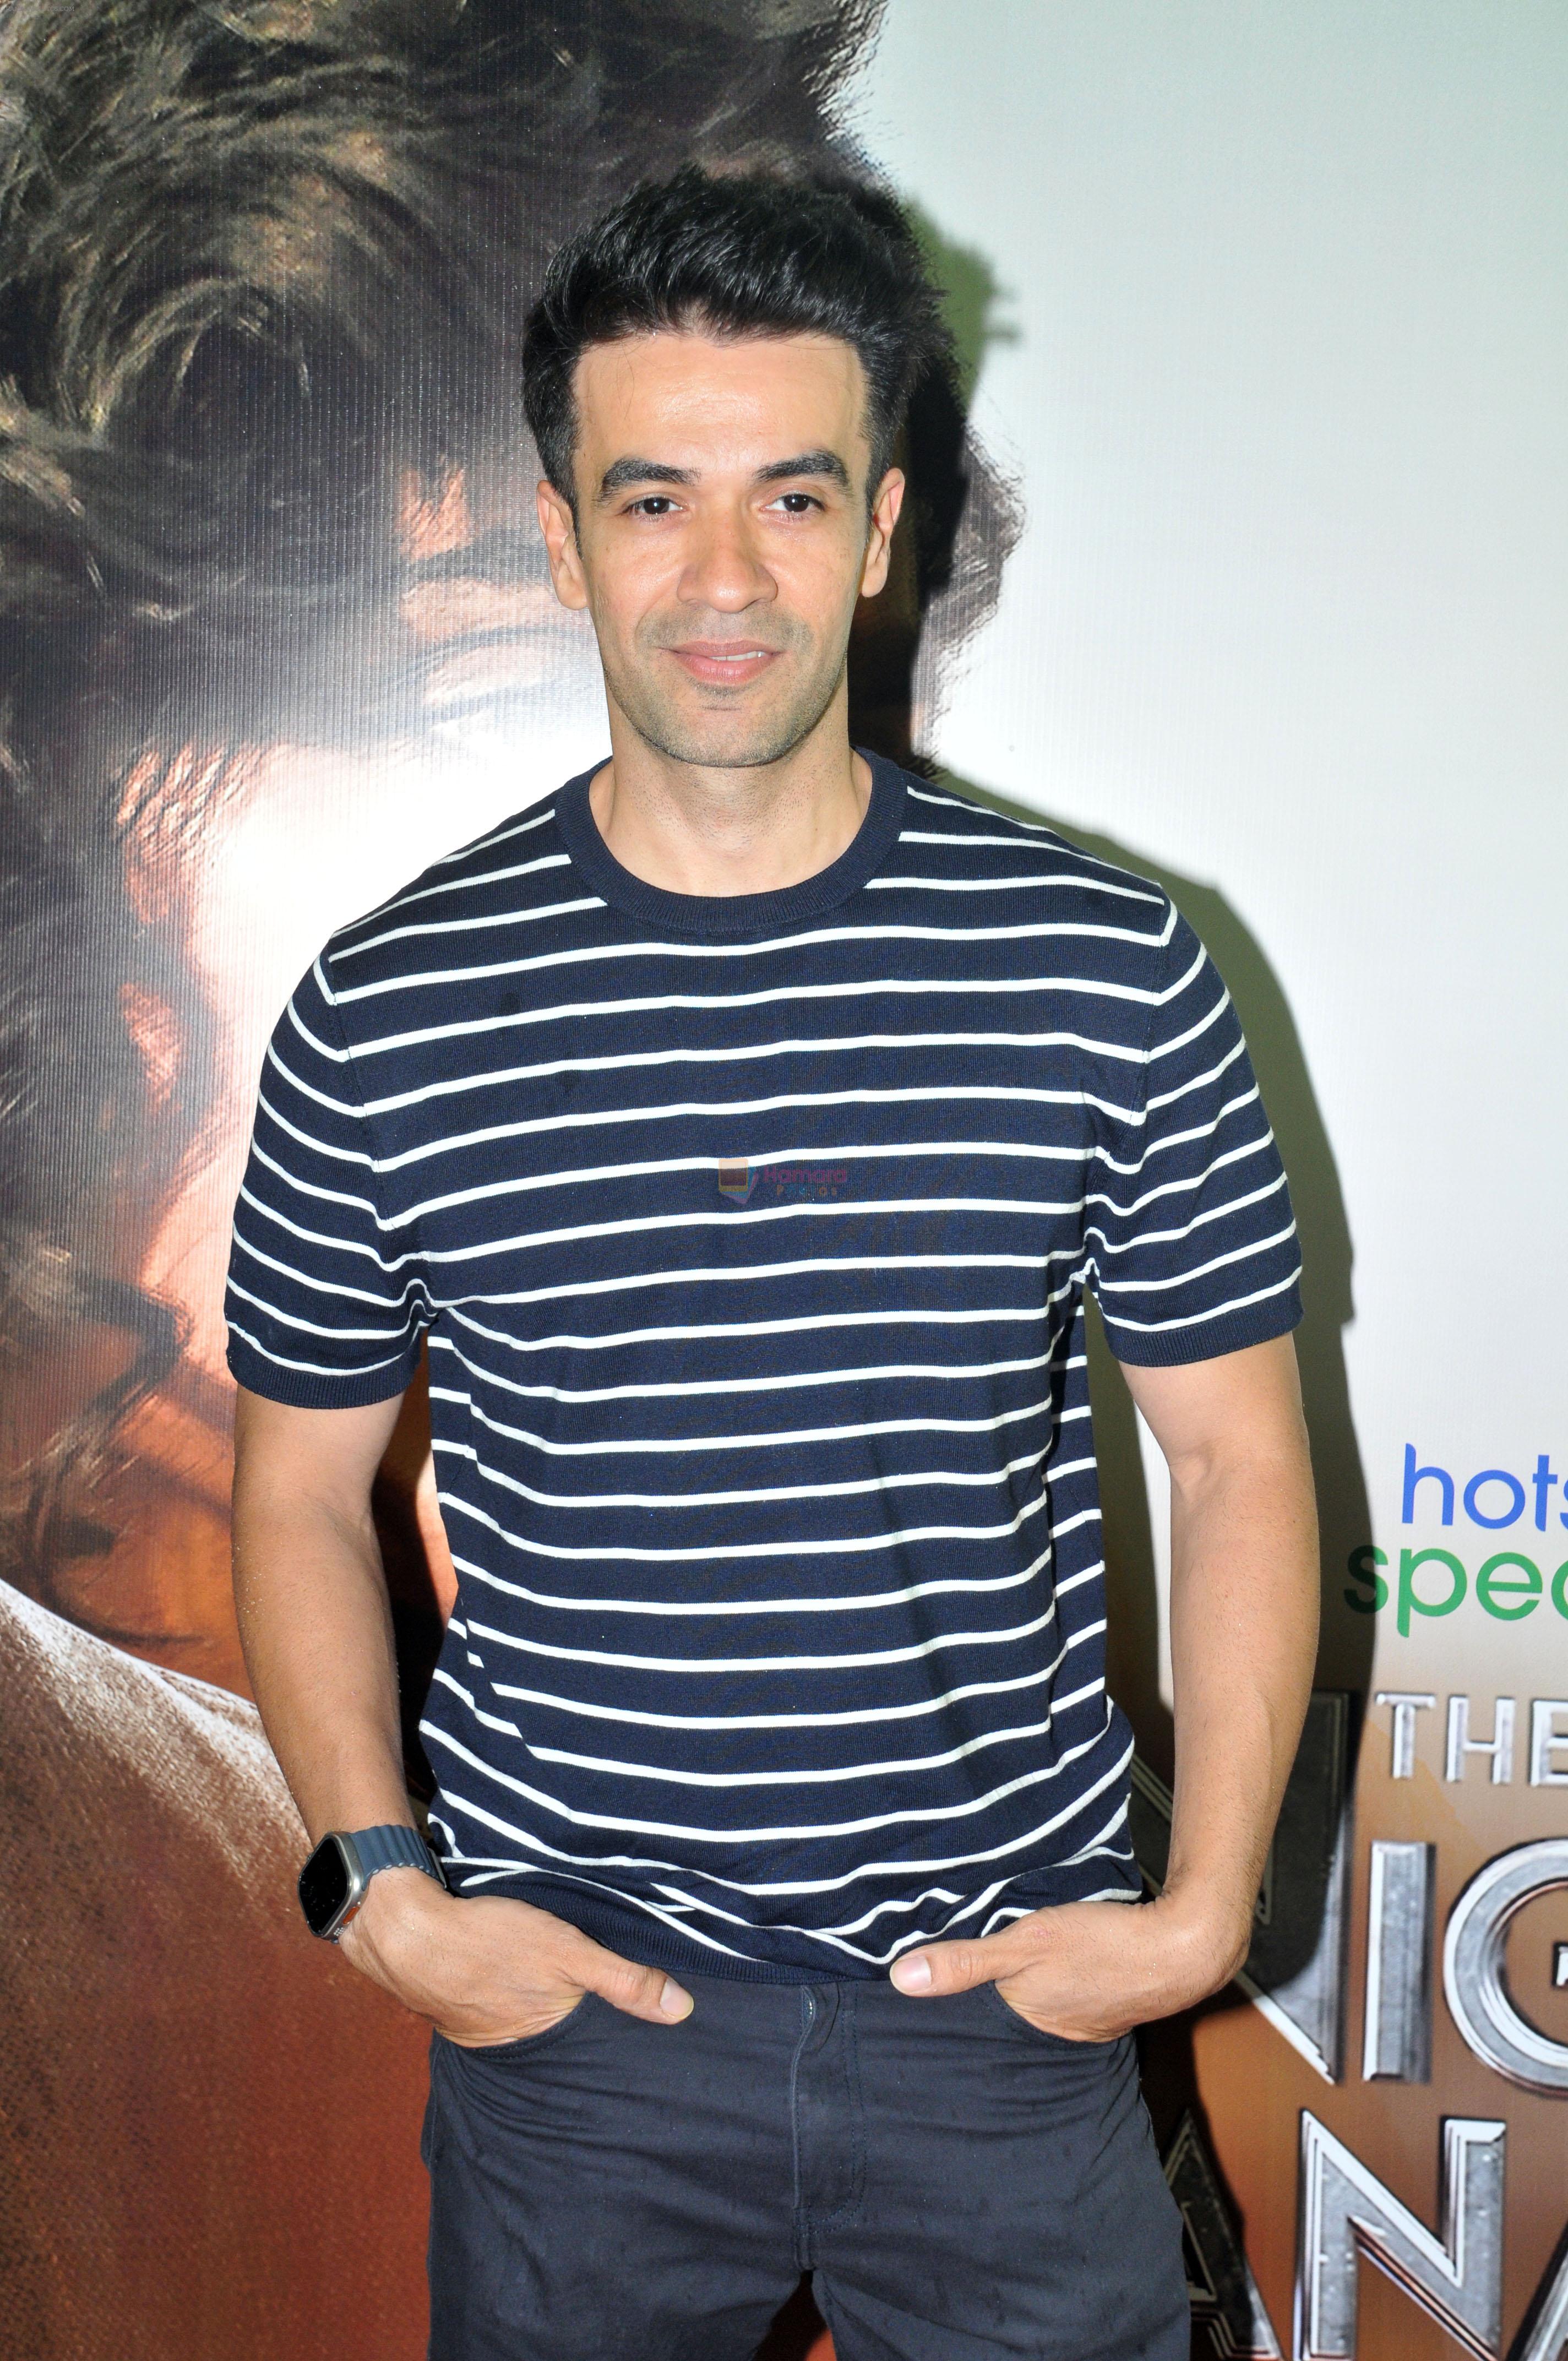 Punit Malhotra on the Red Carpet during screening of series The Night Manager Season 2 on 29 Jun 2023